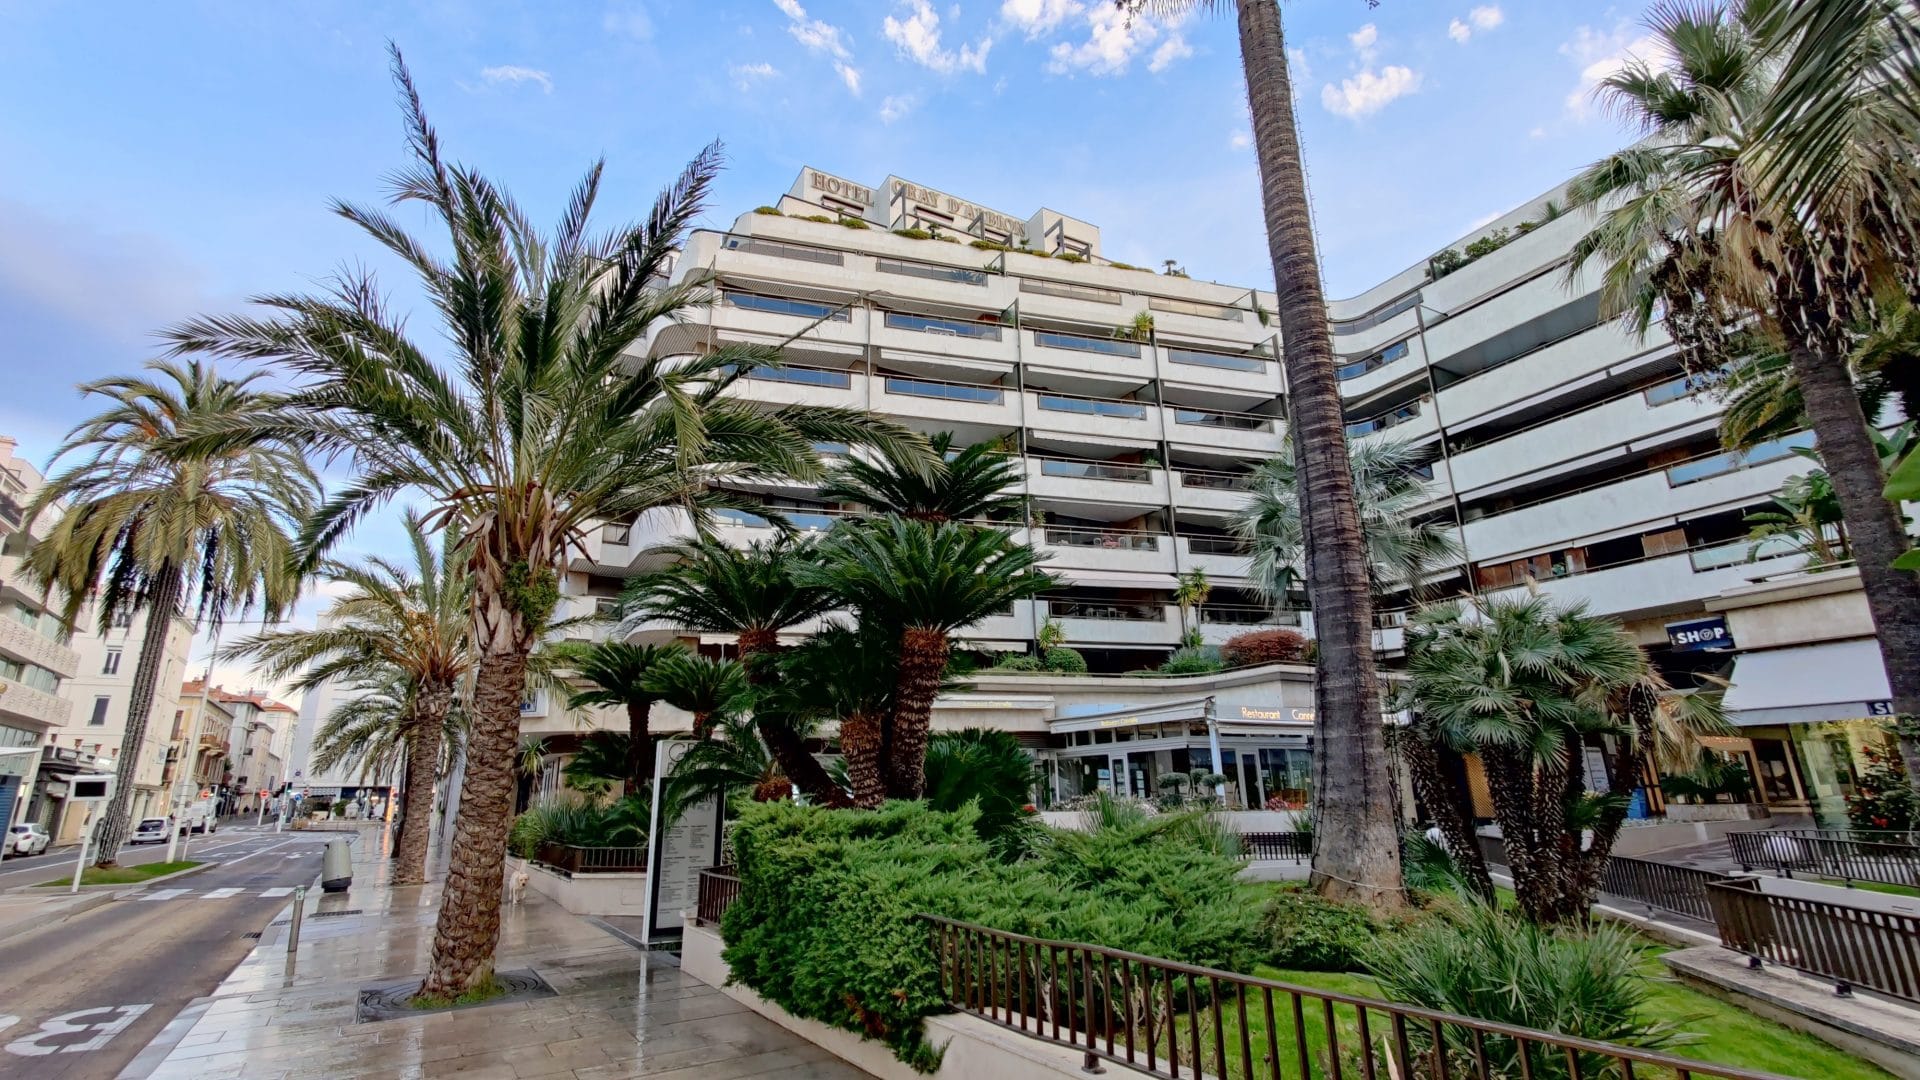 Hotel Barriere Le Gray D'Albion Cannes Gebaeude 2